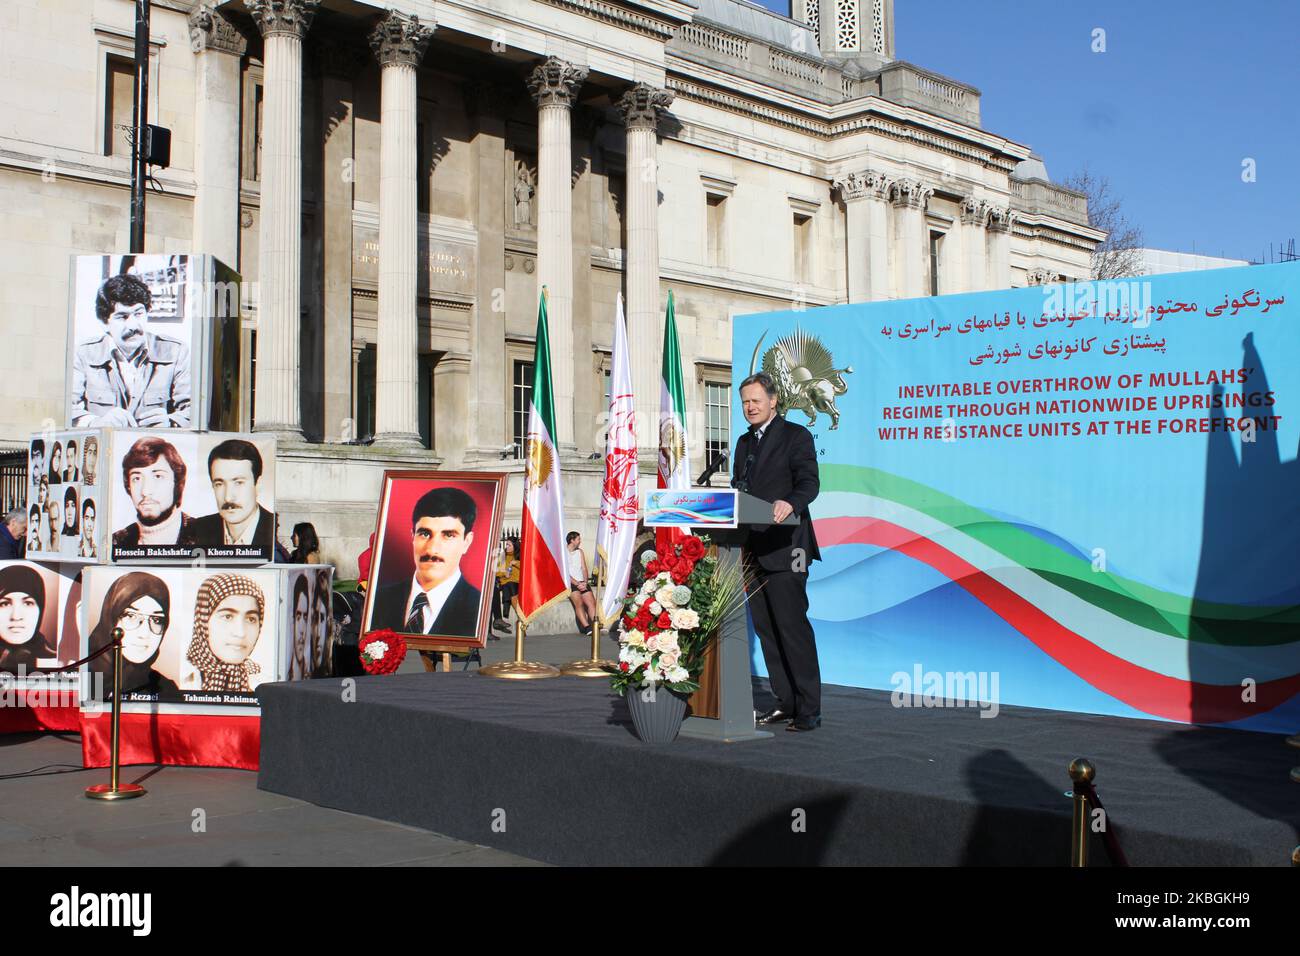 Matthew Offord, Dr. Matthew Offord, Conservative MP for Hendon joined the rally of Anglo-Iranian Communities in London's Trafalgar Square on the anniversary of the 1979 anti-monarchic revolution on Saturday, February 8, 2020. Dr. Matthew Offord said Iranâ€™s broader opposition coalition, the NCRI, and its president-elect Maryam Rajavi have put forward a democratic alternative to the ruling theocracy that enjoys strong grassroots support in Iran and among Iranian diaspora. (Photo by Siavosh Hosseini/NurPhoto) Stock Photo